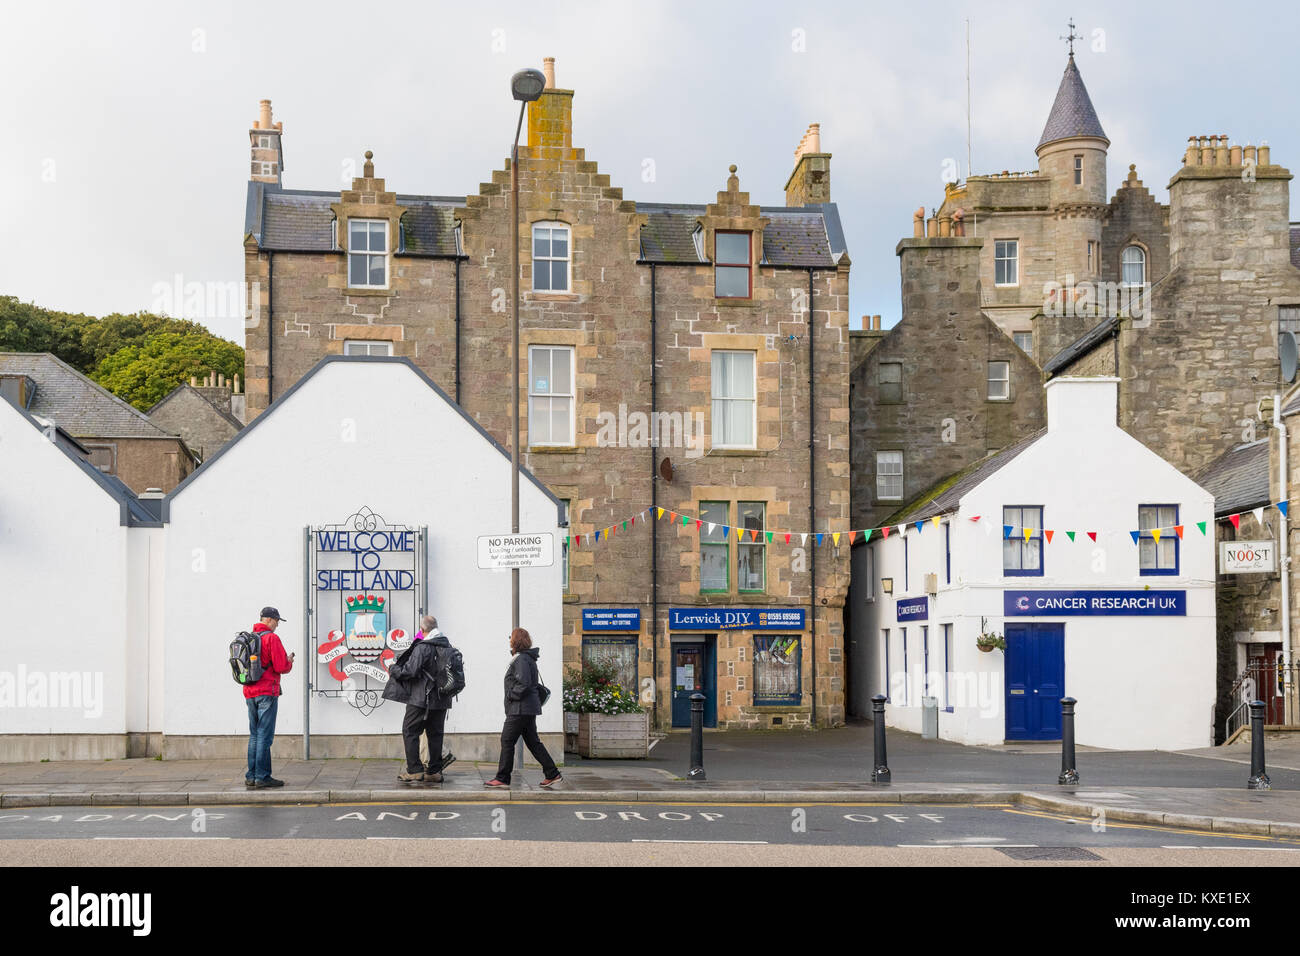 tourists photographing Welcome to Shetland sign in the town of Lerwick, Shetland Islands, Scotland, UK Stock Photo